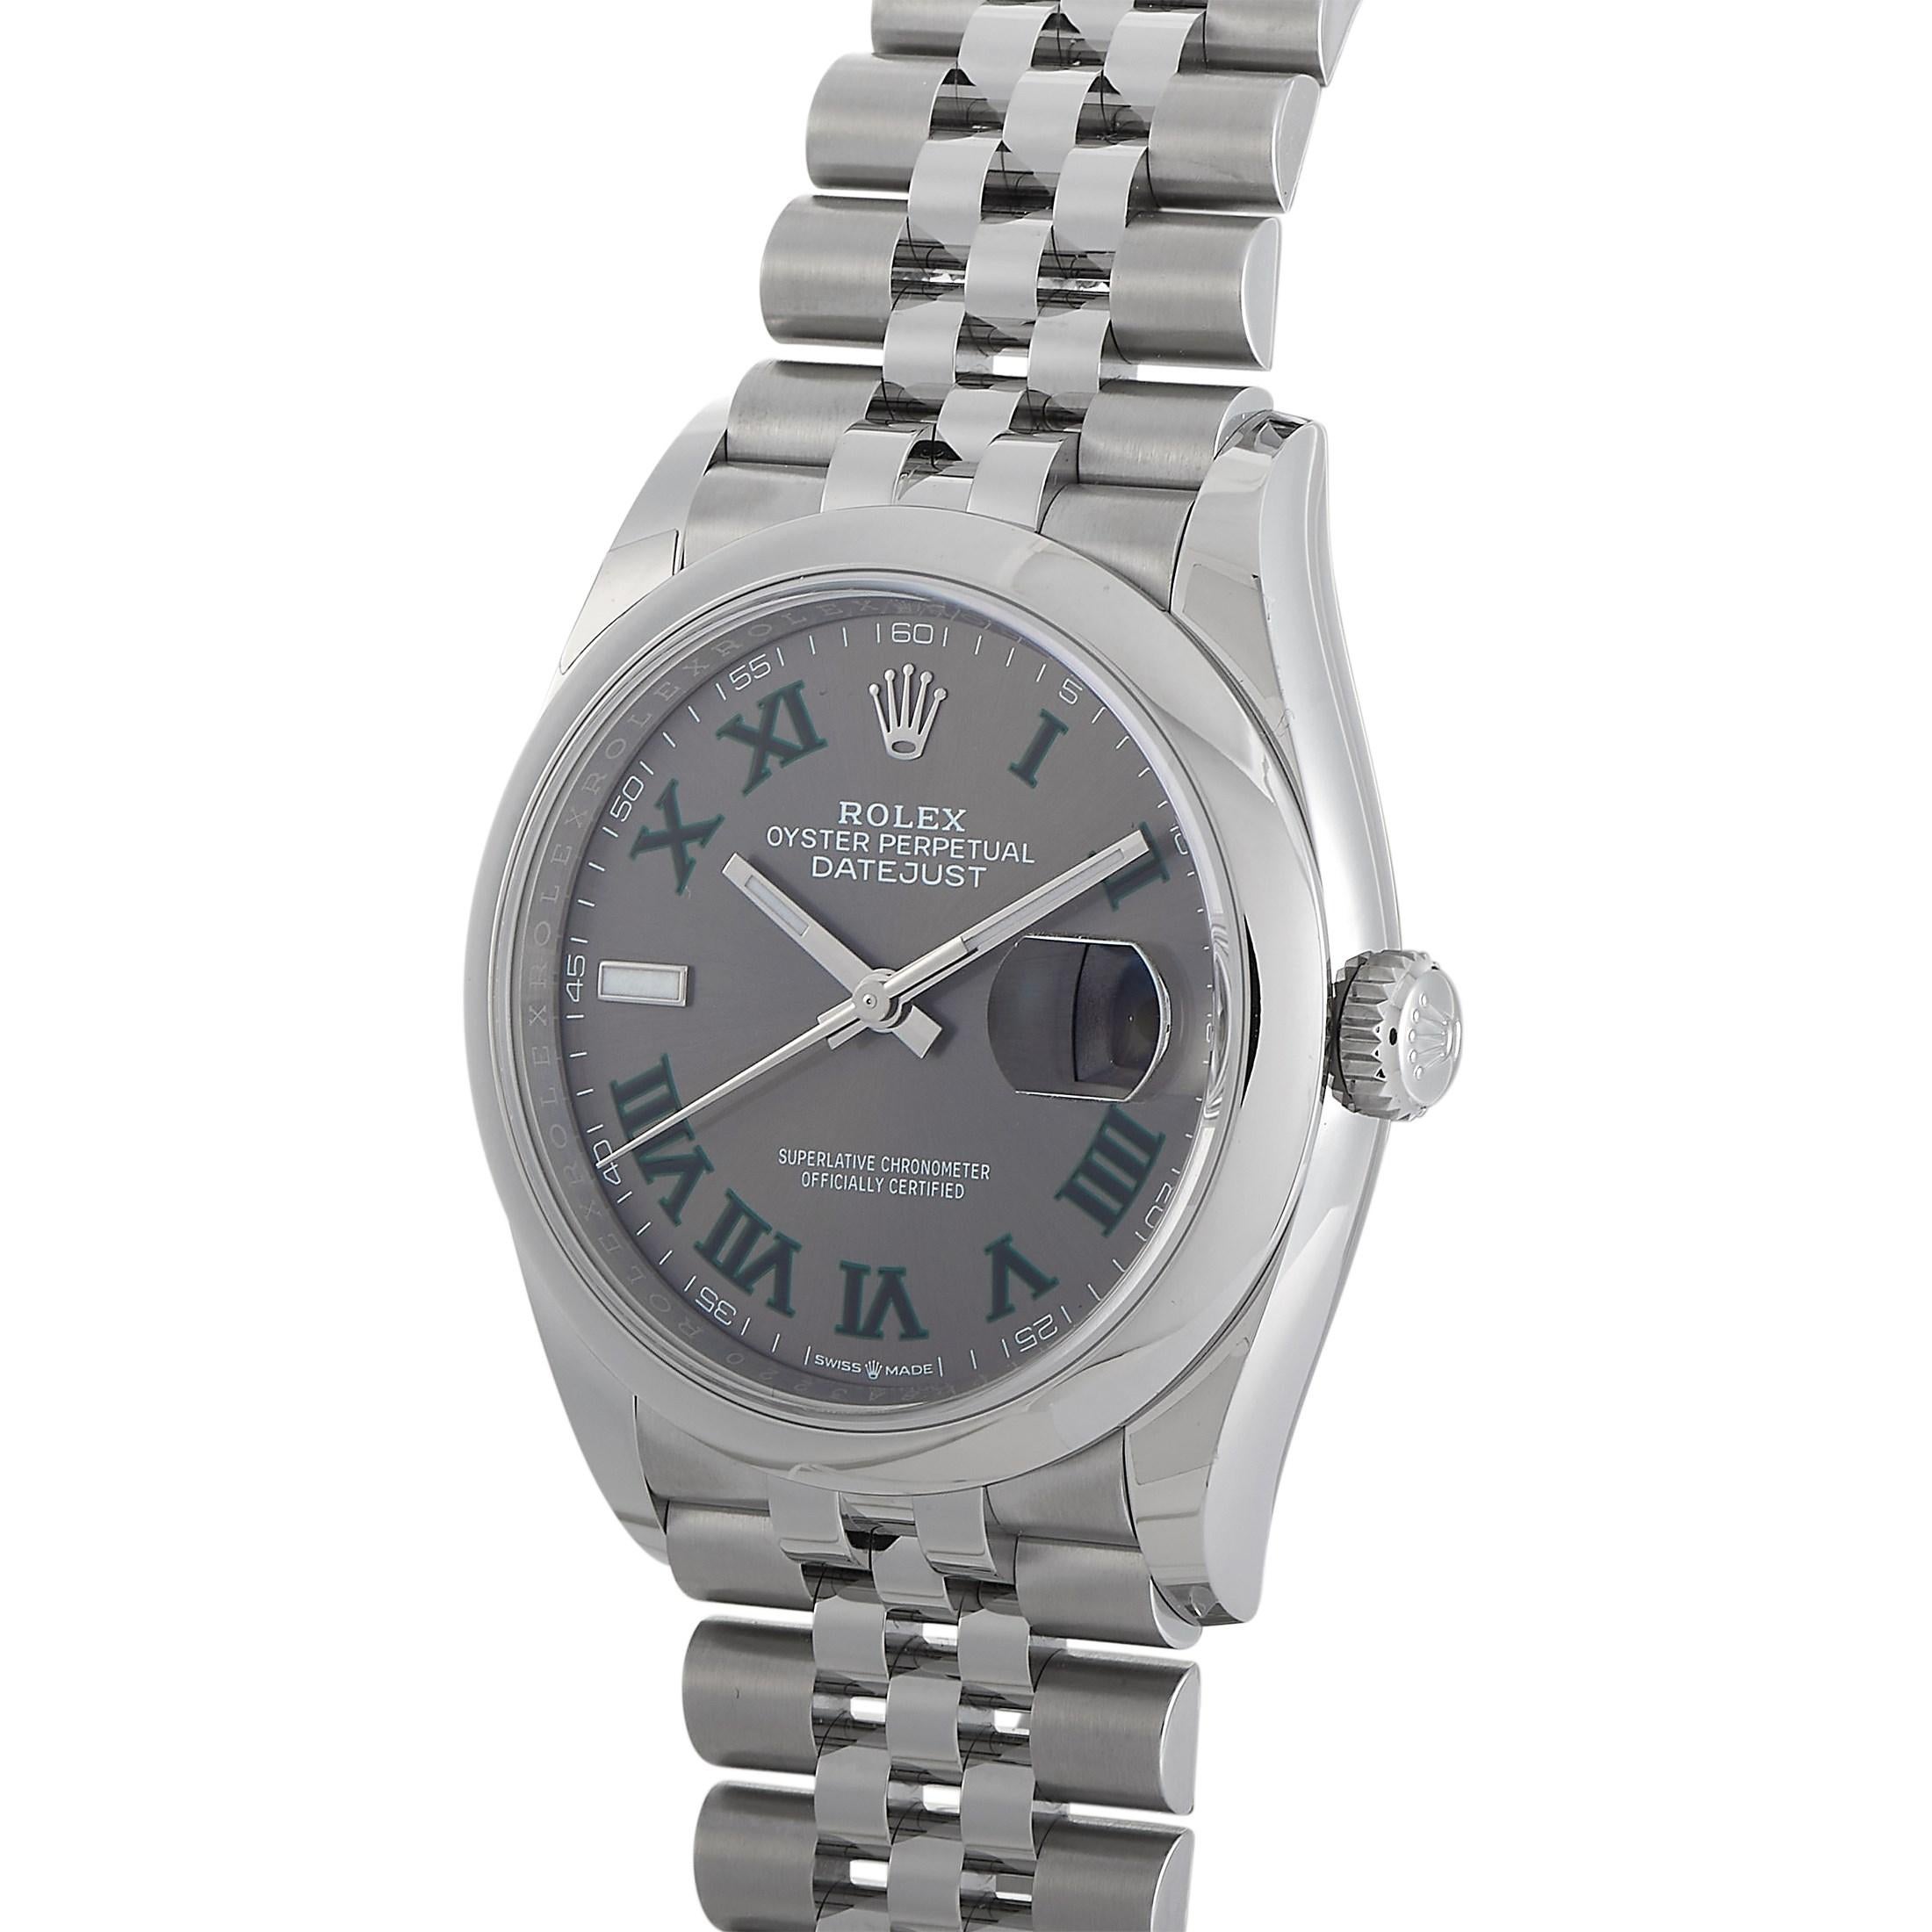 Featuring the classic 36 mm case size, the Rolex Datejust 36 Slate Jubilee Watch 126200-0017 will easily become a favorite sporty-casual dress watch. Although fitted with the smart and sharp-looking Jubilee bracelet, a more sober flat bezel balances